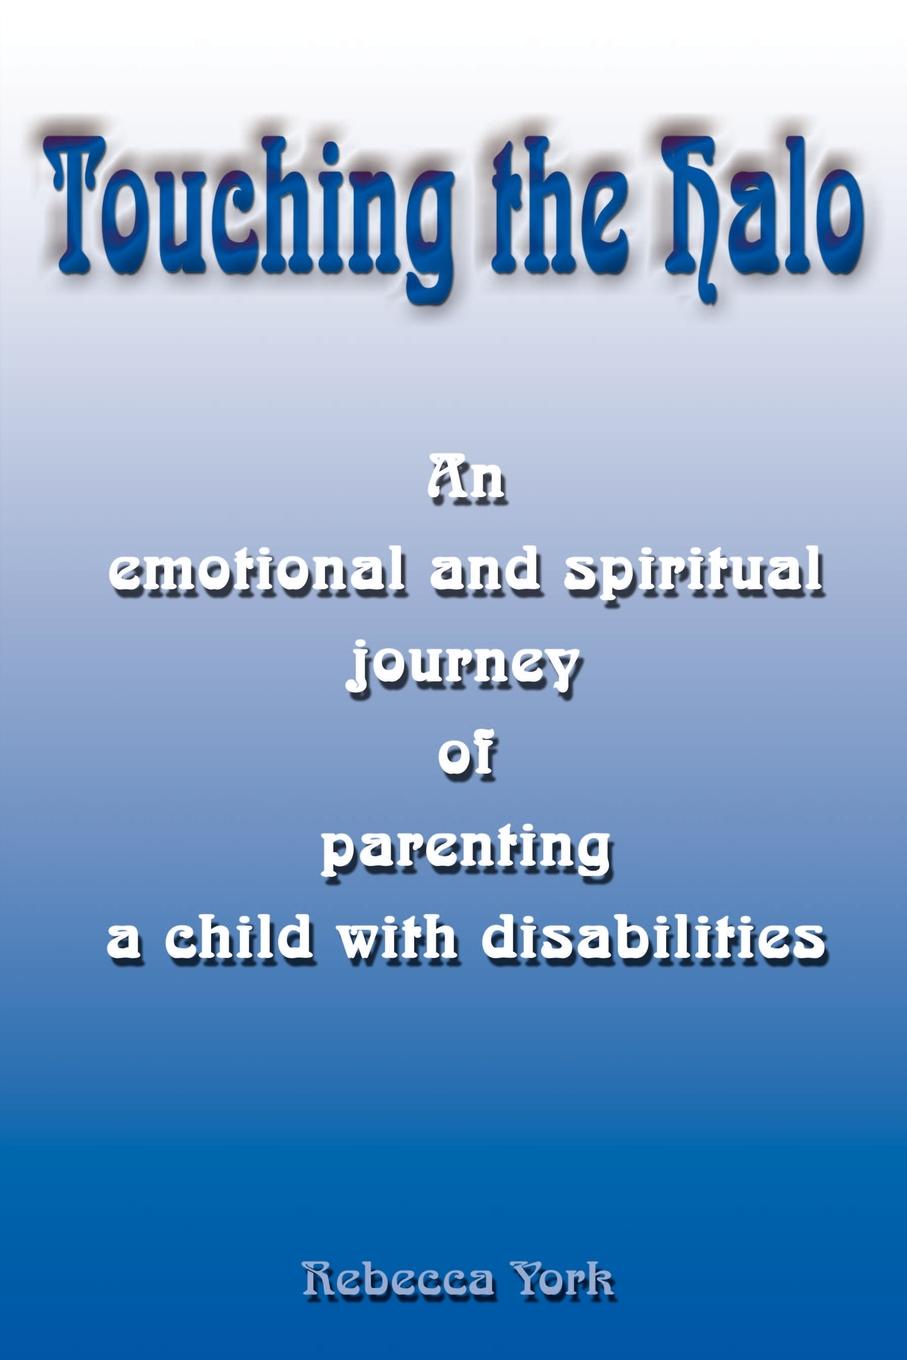 Touching the Halo. An Emotional and Spiritual Journey of Parenting a Child with Disabilities